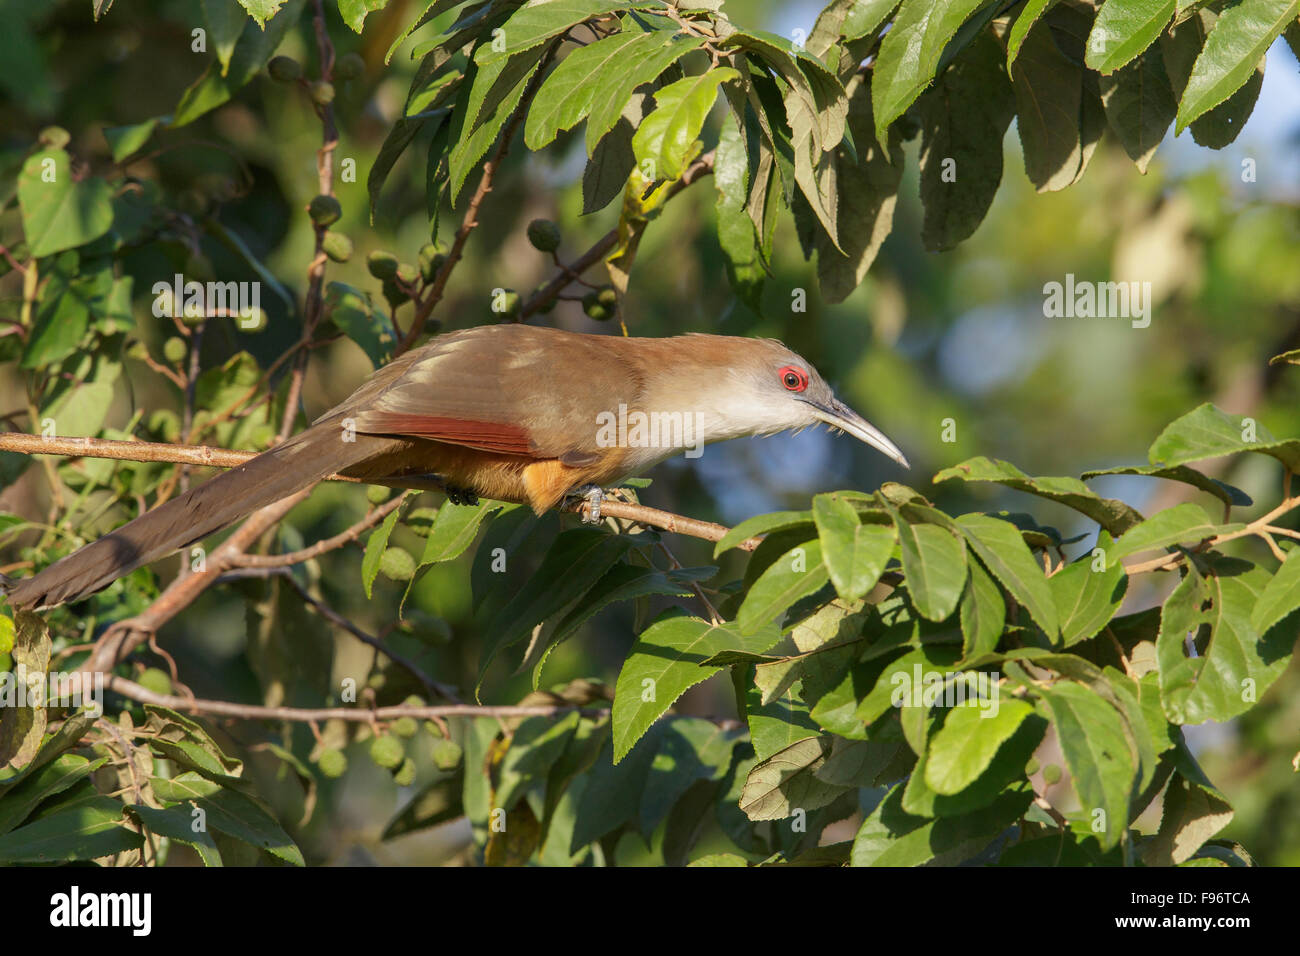 Great Lizard Cuckoo (Coccyzus merlini) perched on a branch in Cuba. Stock Photo